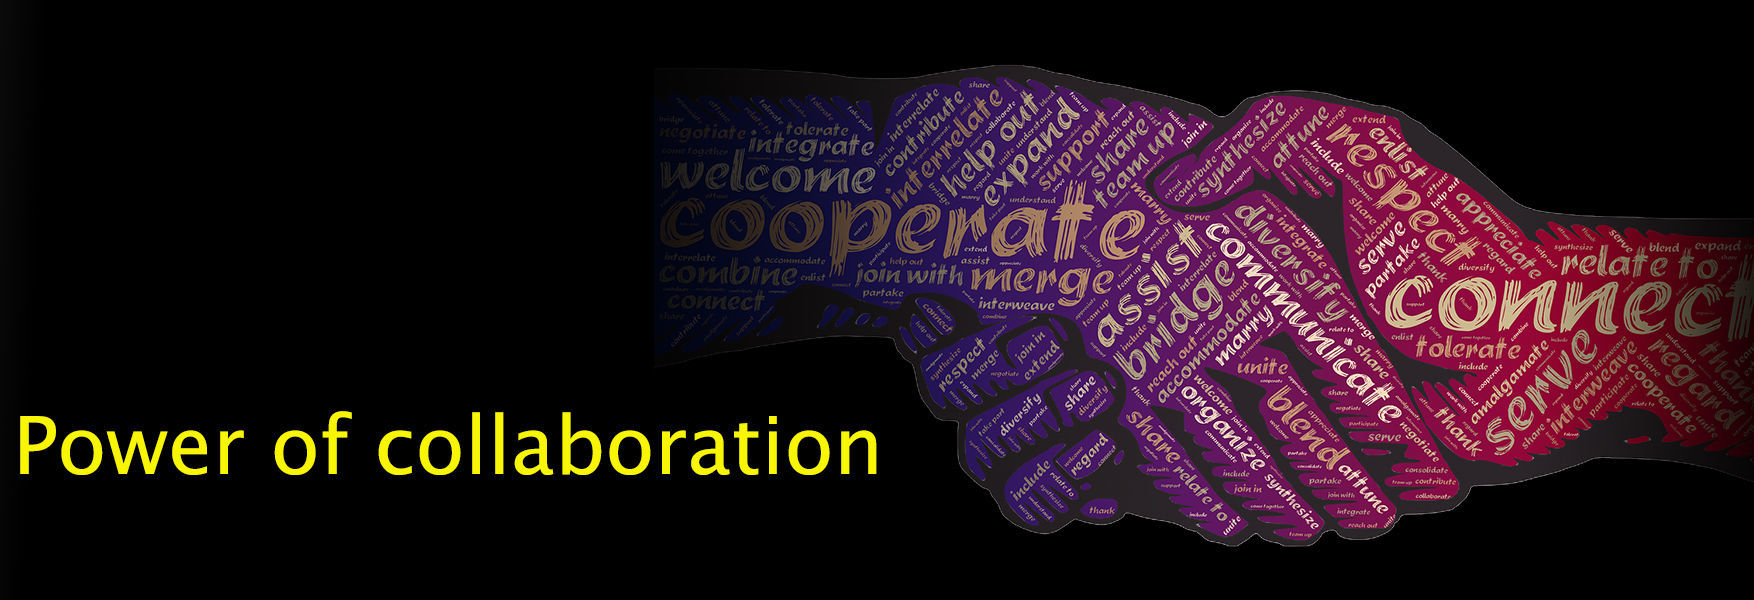 Power of collaboration